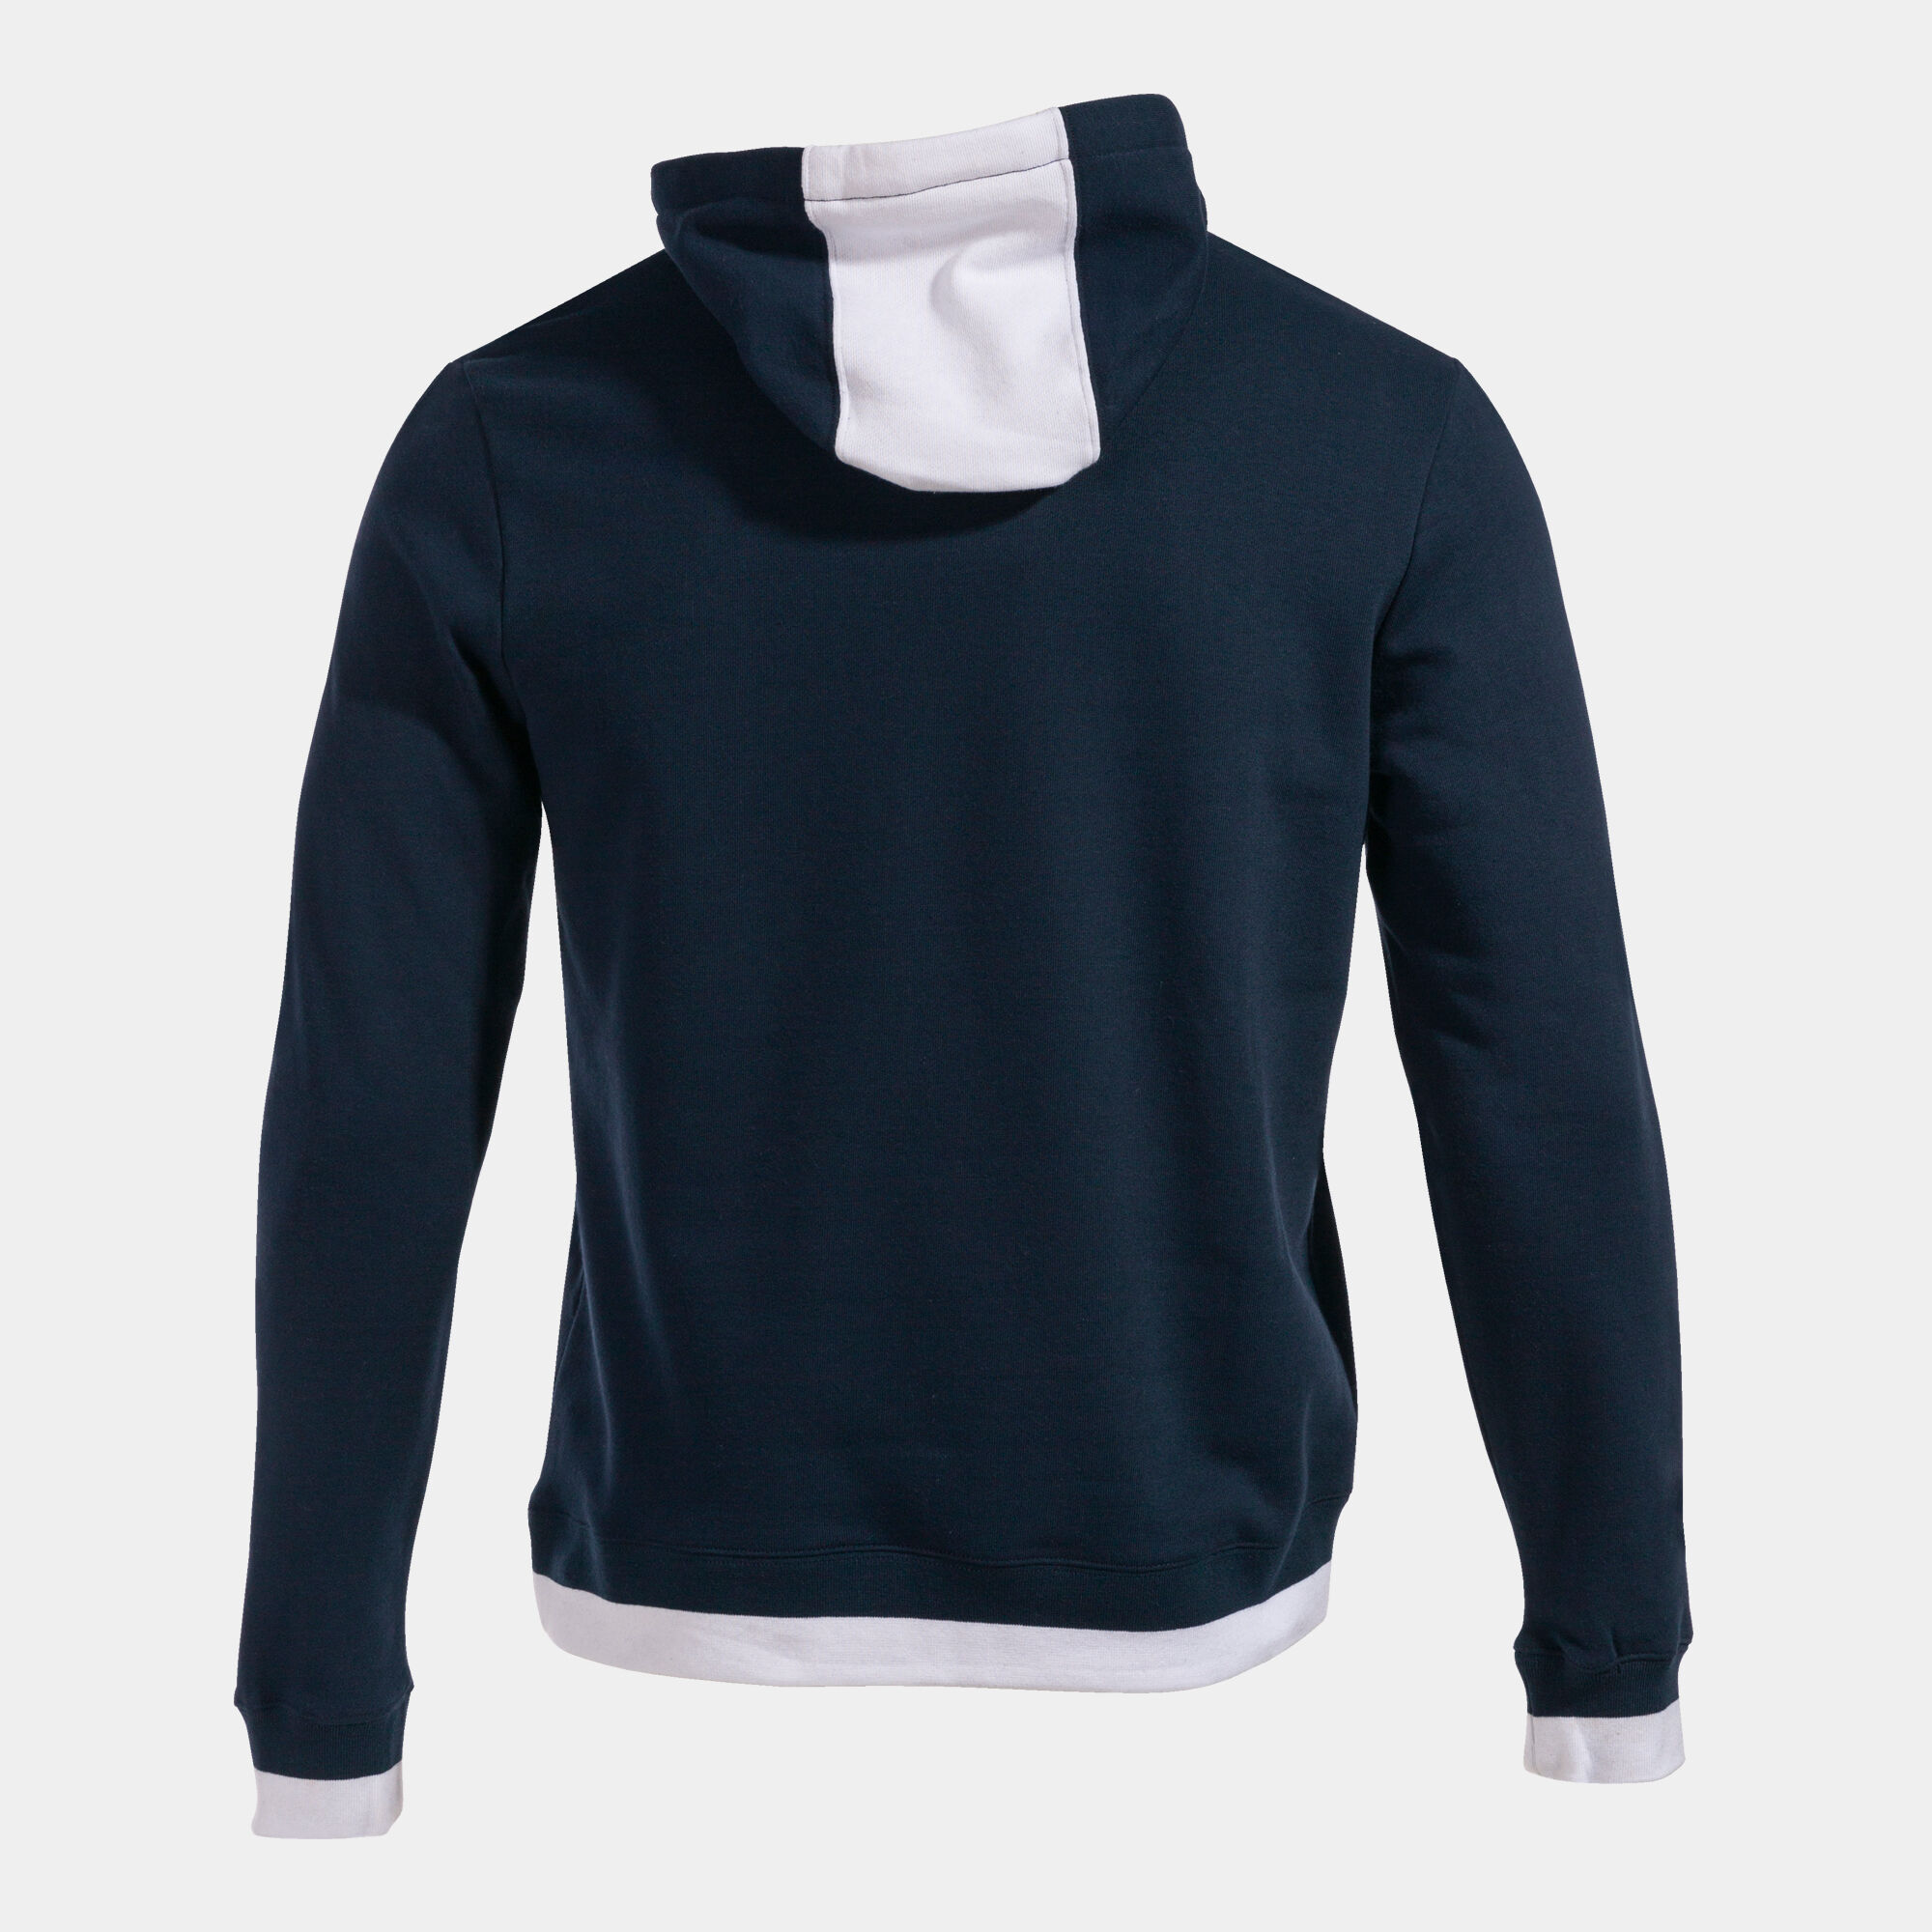 HOODED SWEATER MAN CONFORT II NAVY BLUE WHITE